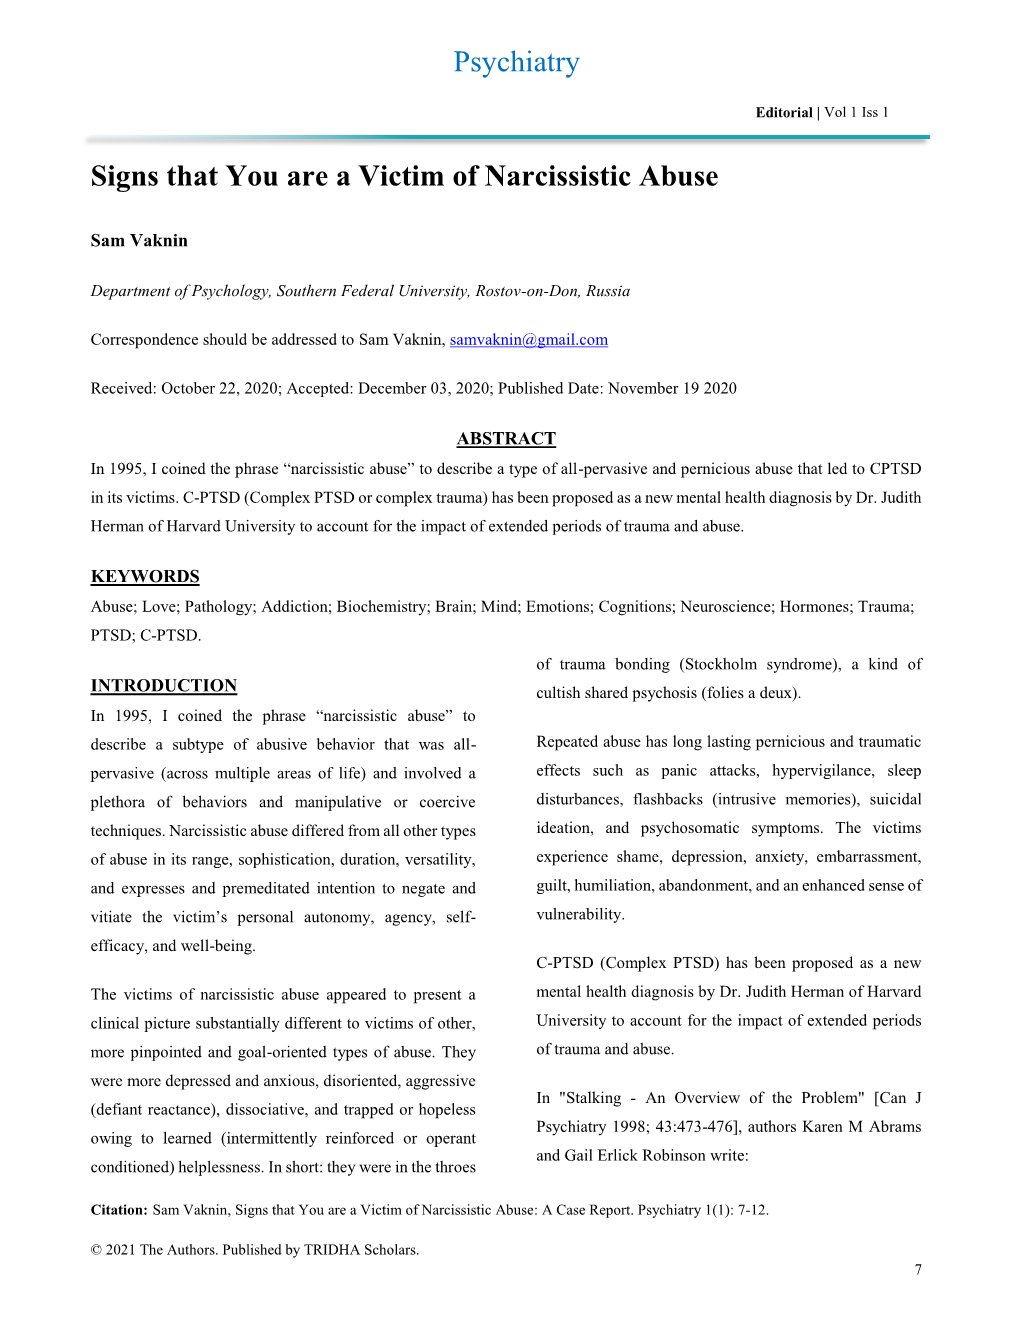 Psychiatry Signs That You Are a Victim of Narcissistic Abuse